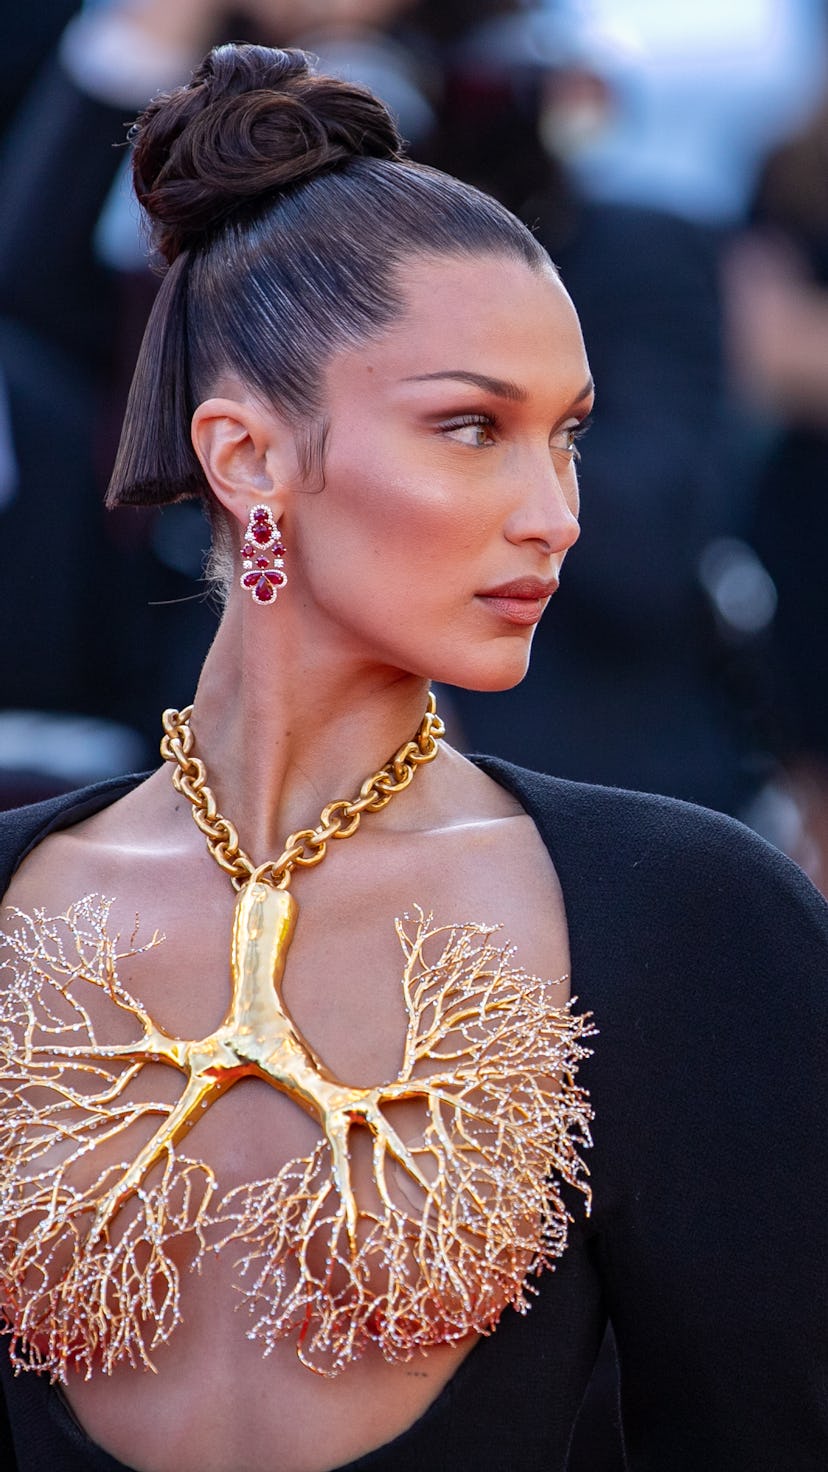 Bella Hadid wearing a large gold necklace in Cannes